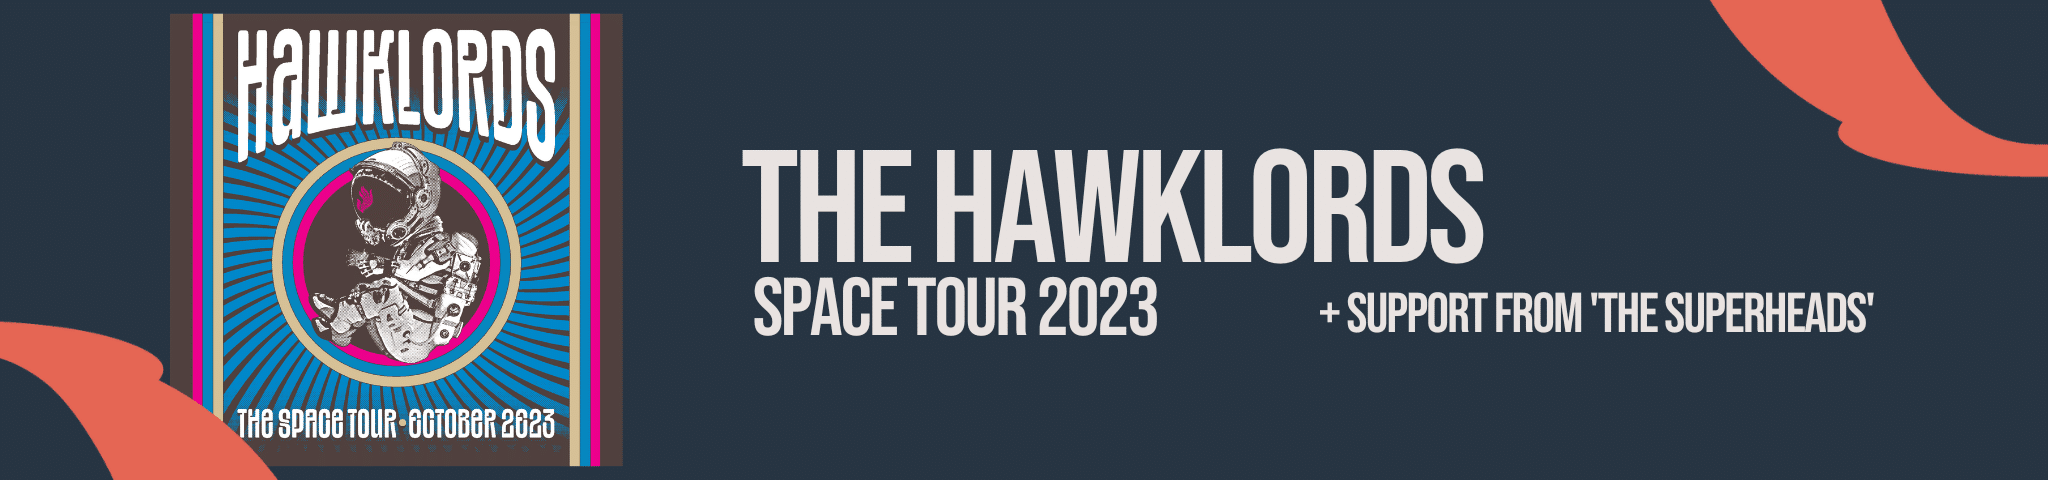 HAWKLORDS – THE SPACE TOUR 2023 – 26TH OCTOBER